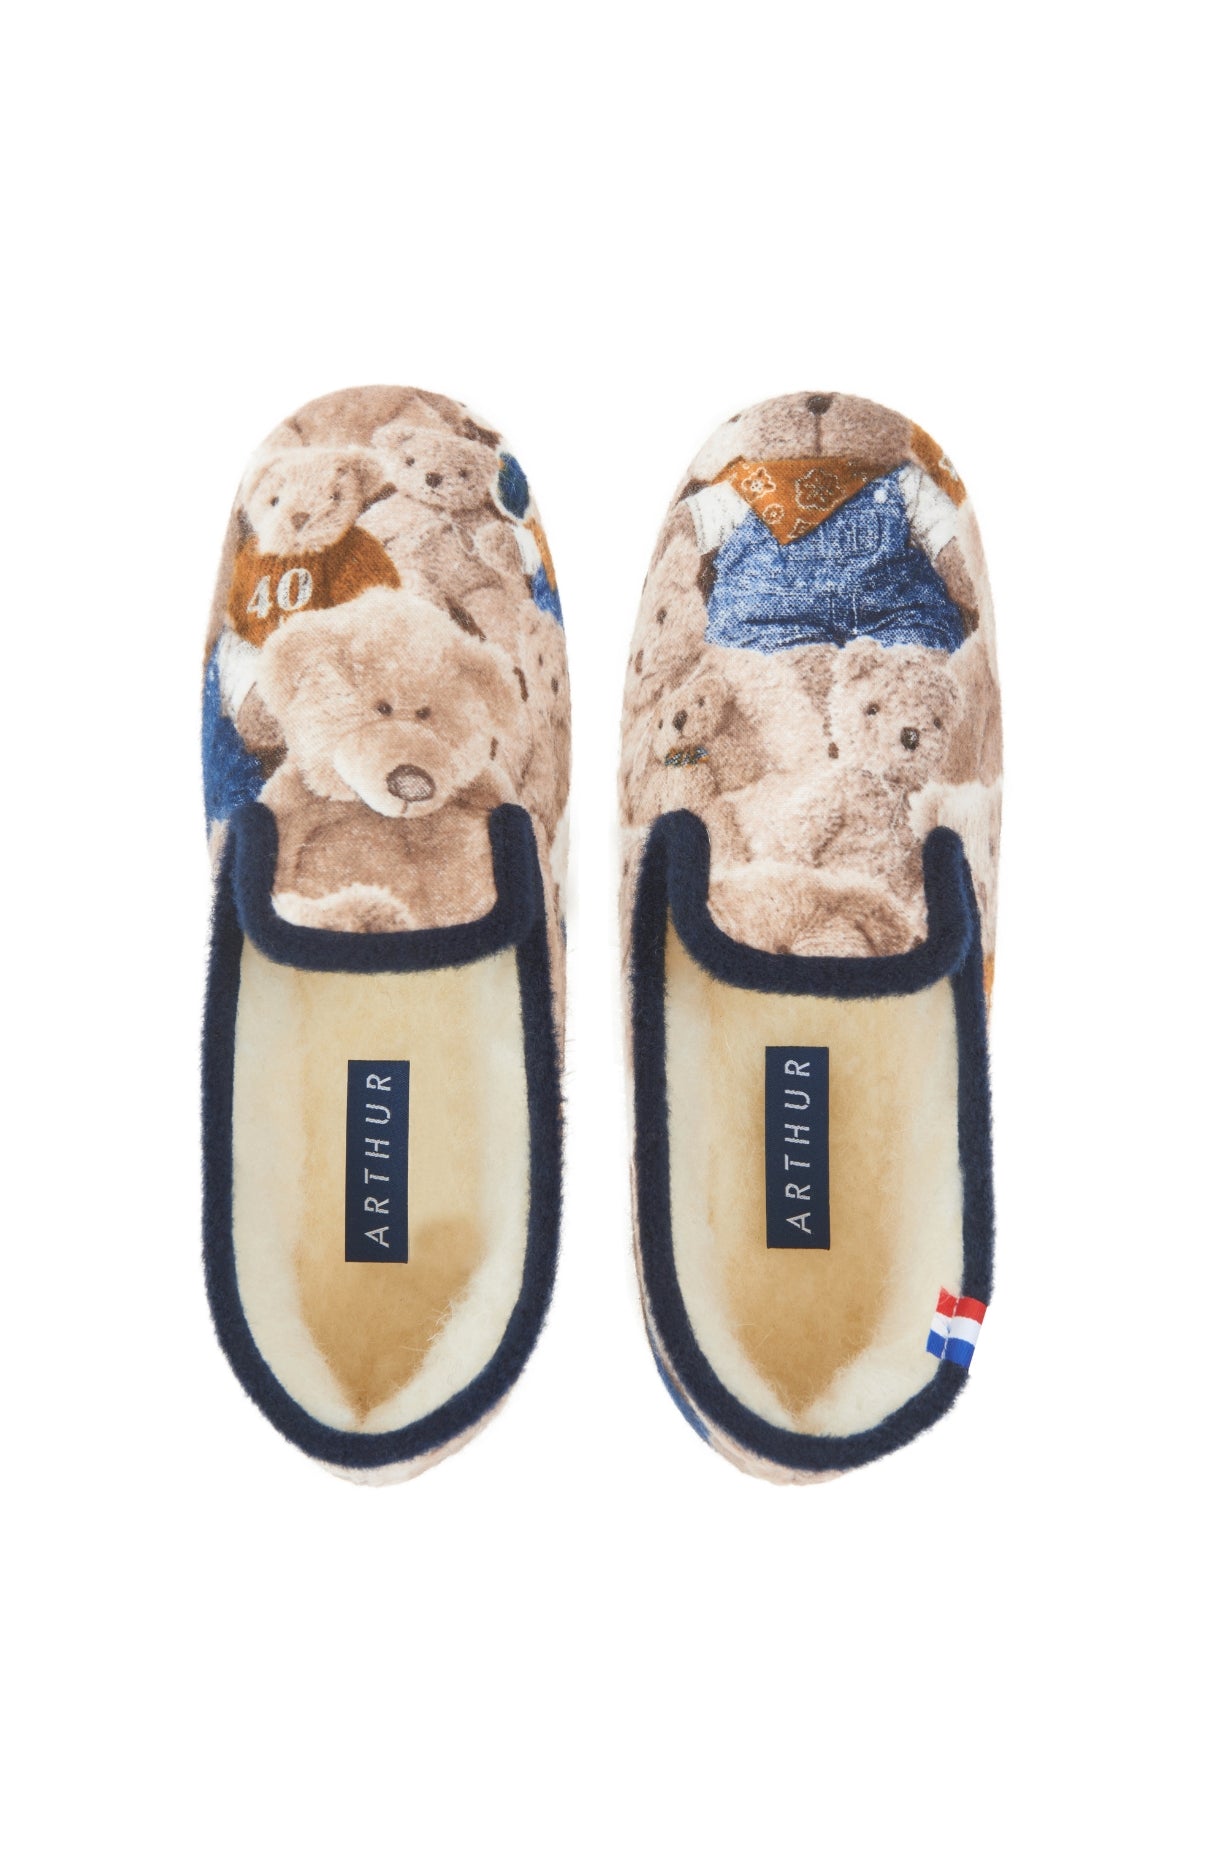 Slippers - Teddy 40 years old